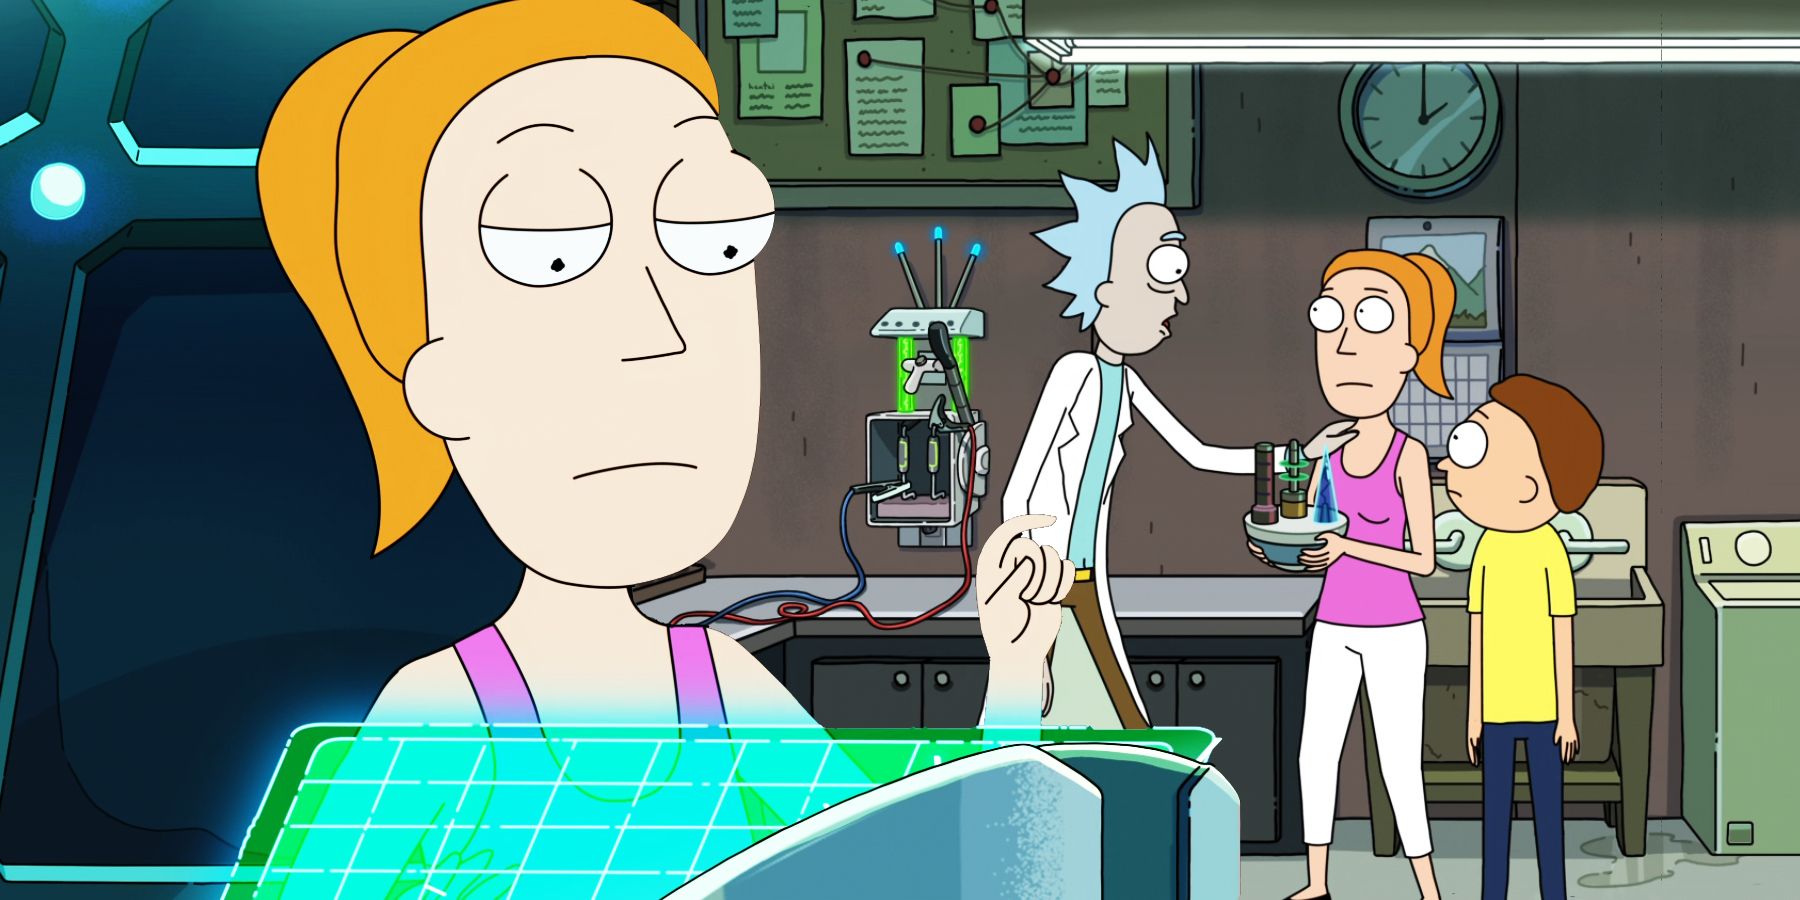 Rick and Morty season 6 premiere explains why Rick prefers Summer over Morty